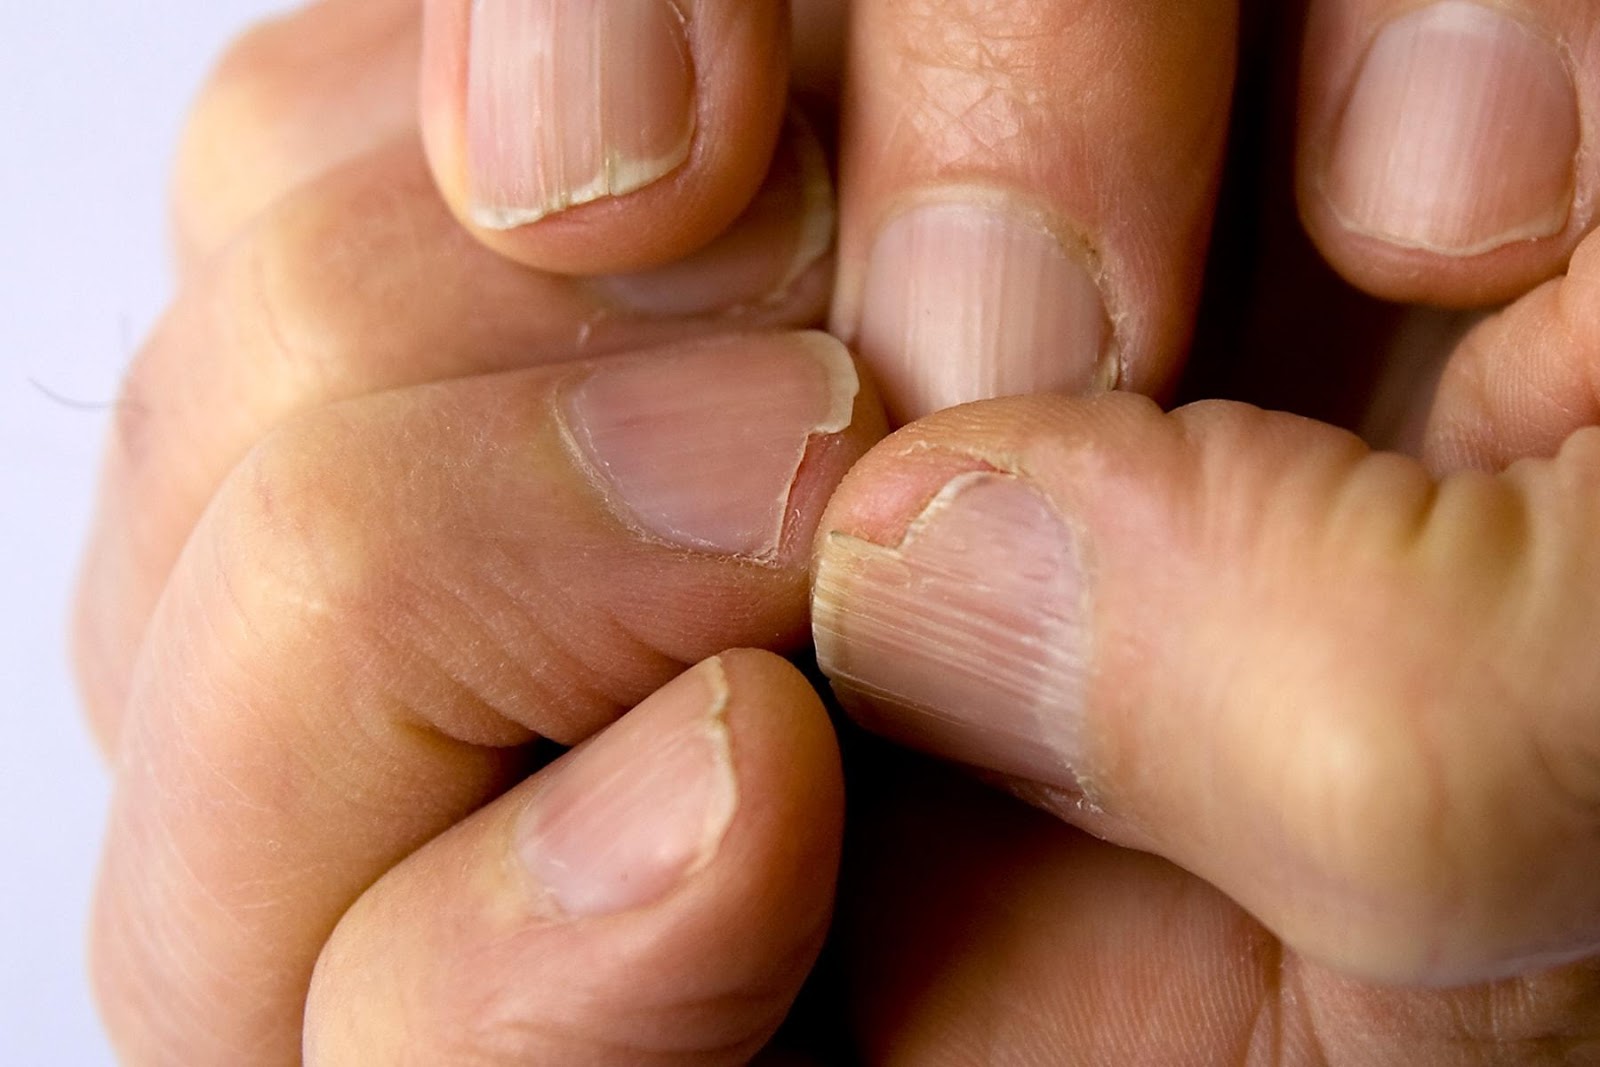 Top 10 reasons for brittle and deformed nails | TheHealthSite.com